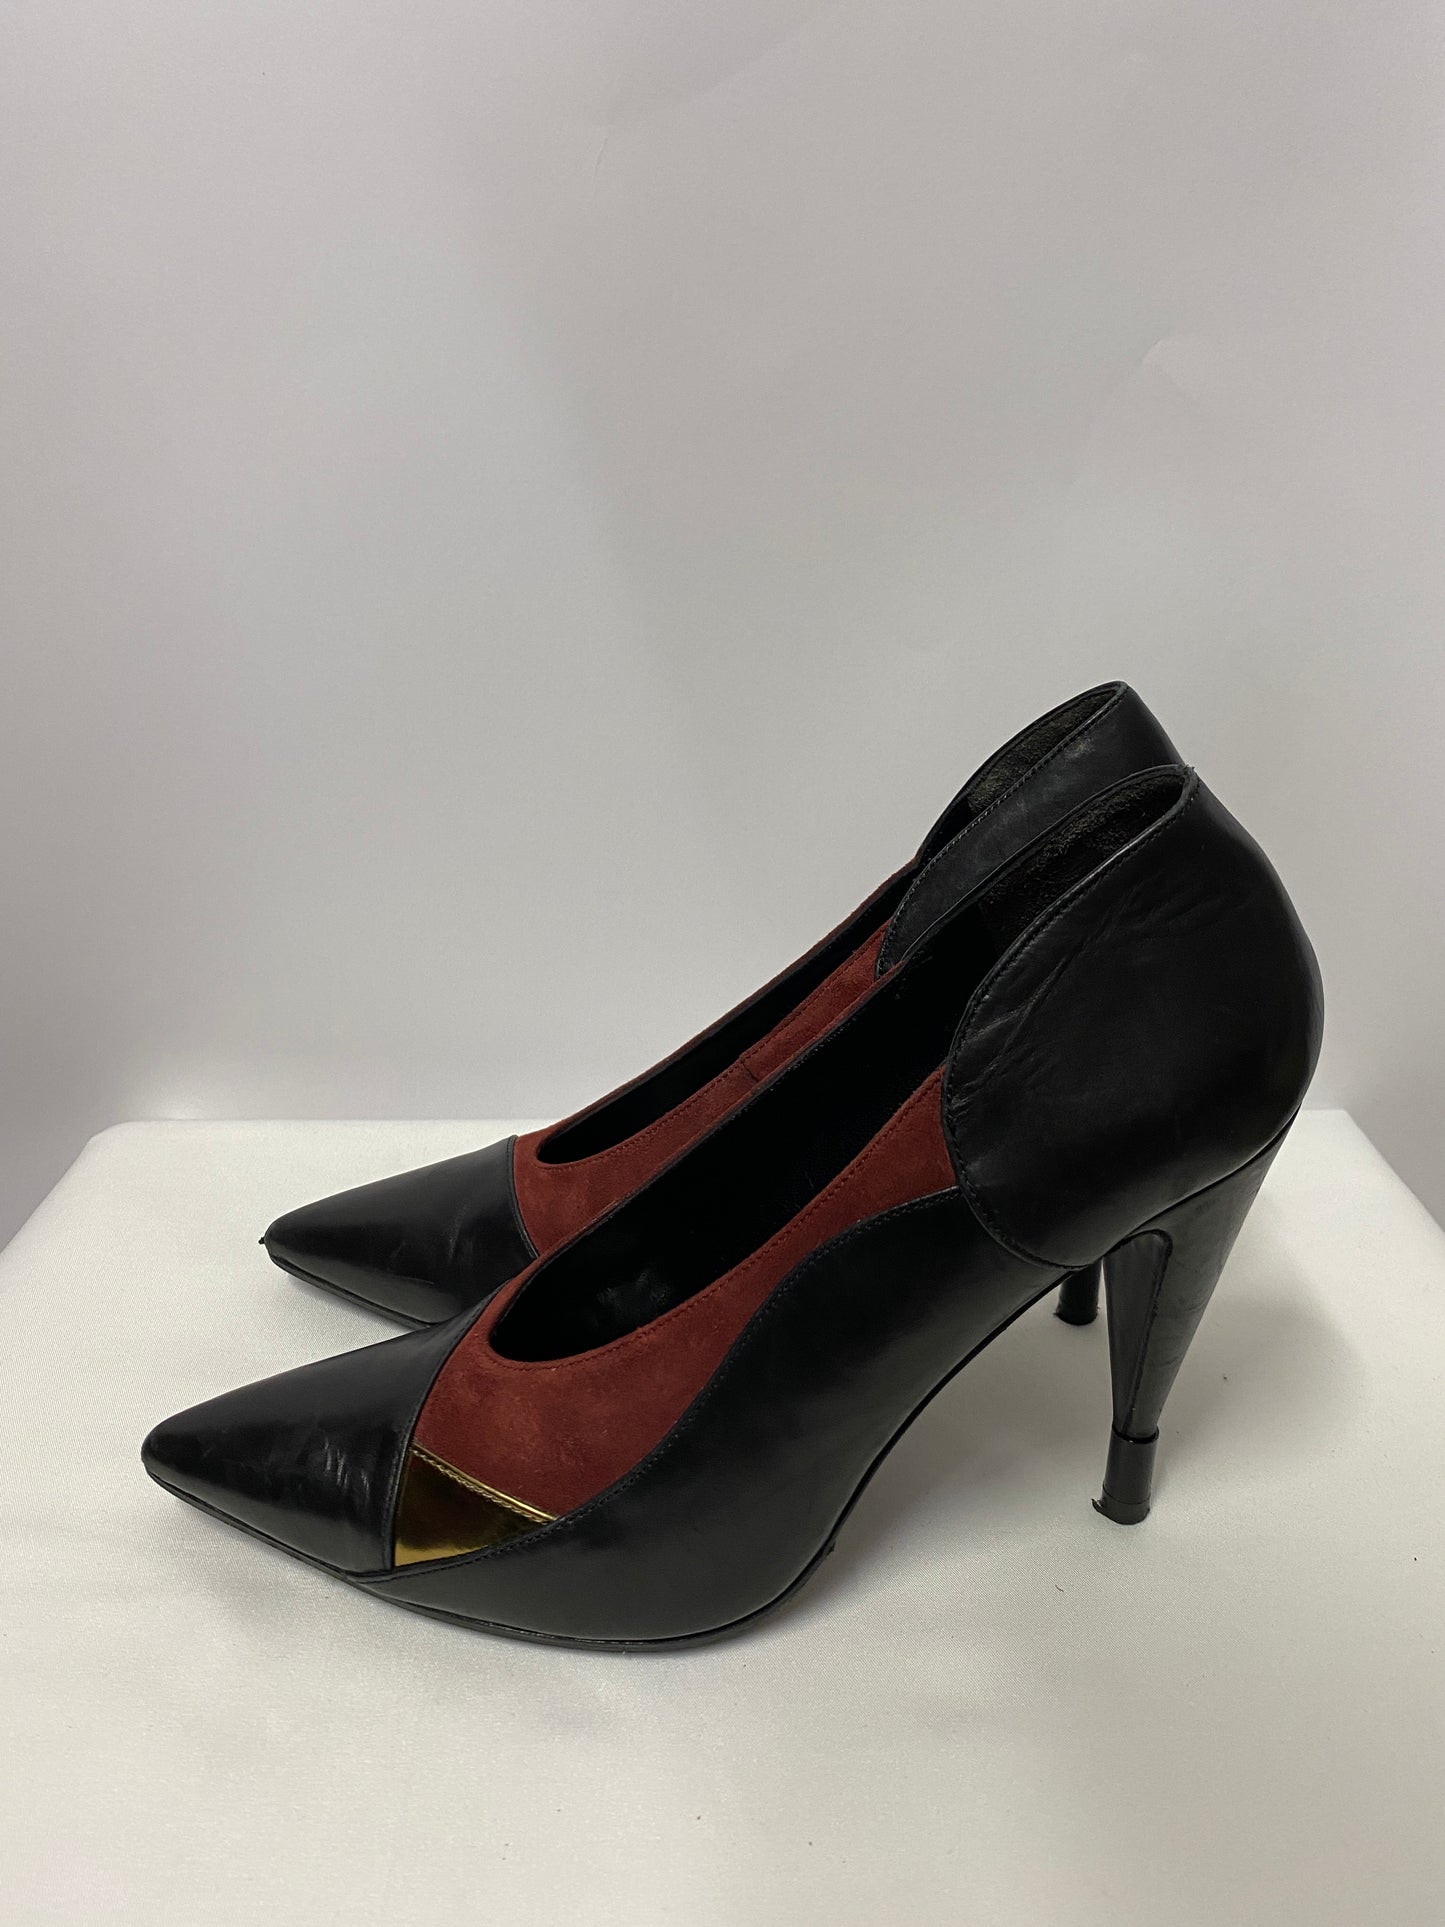 Roland Mouret Suede and Leather pointed Heels 4 1/2